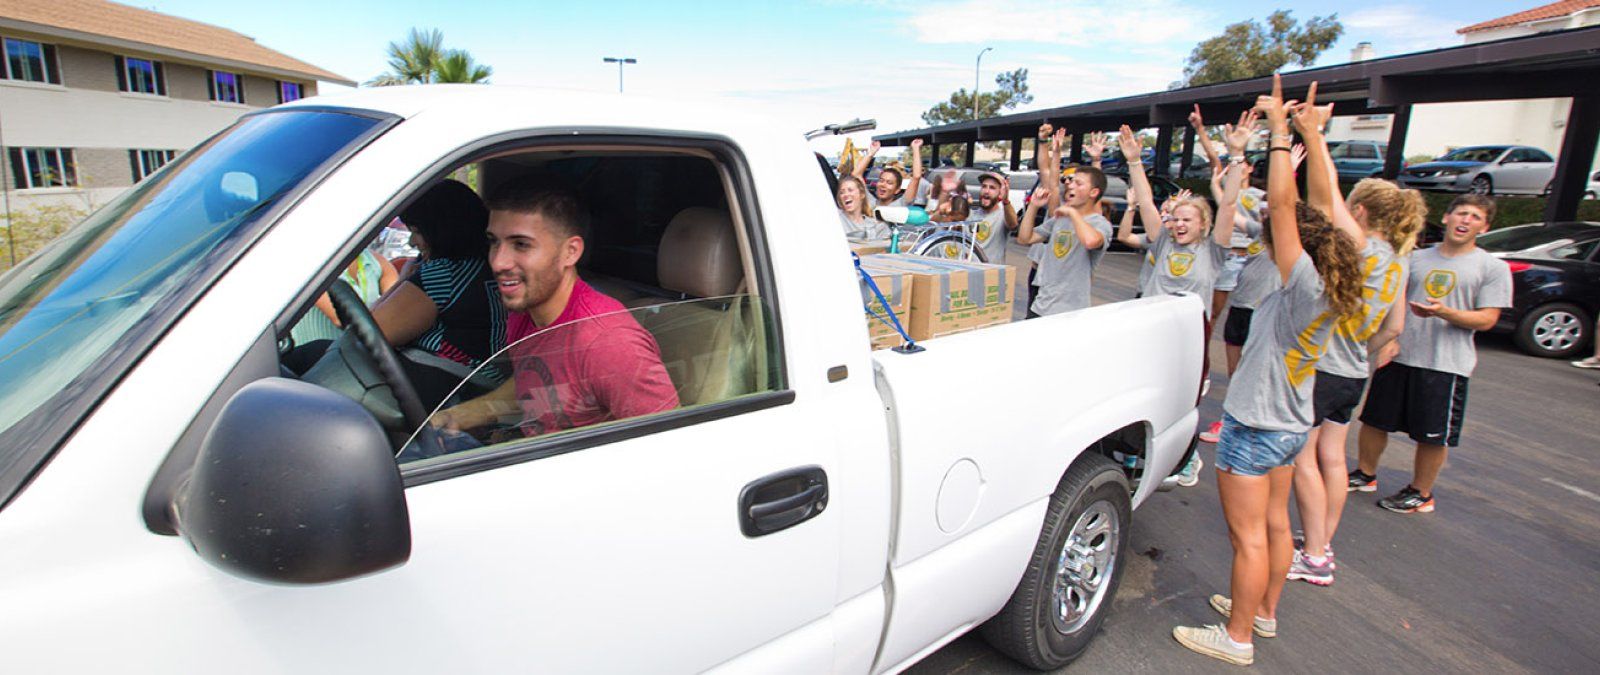 Current PLNU students eagerly help new freshmen unload their car.